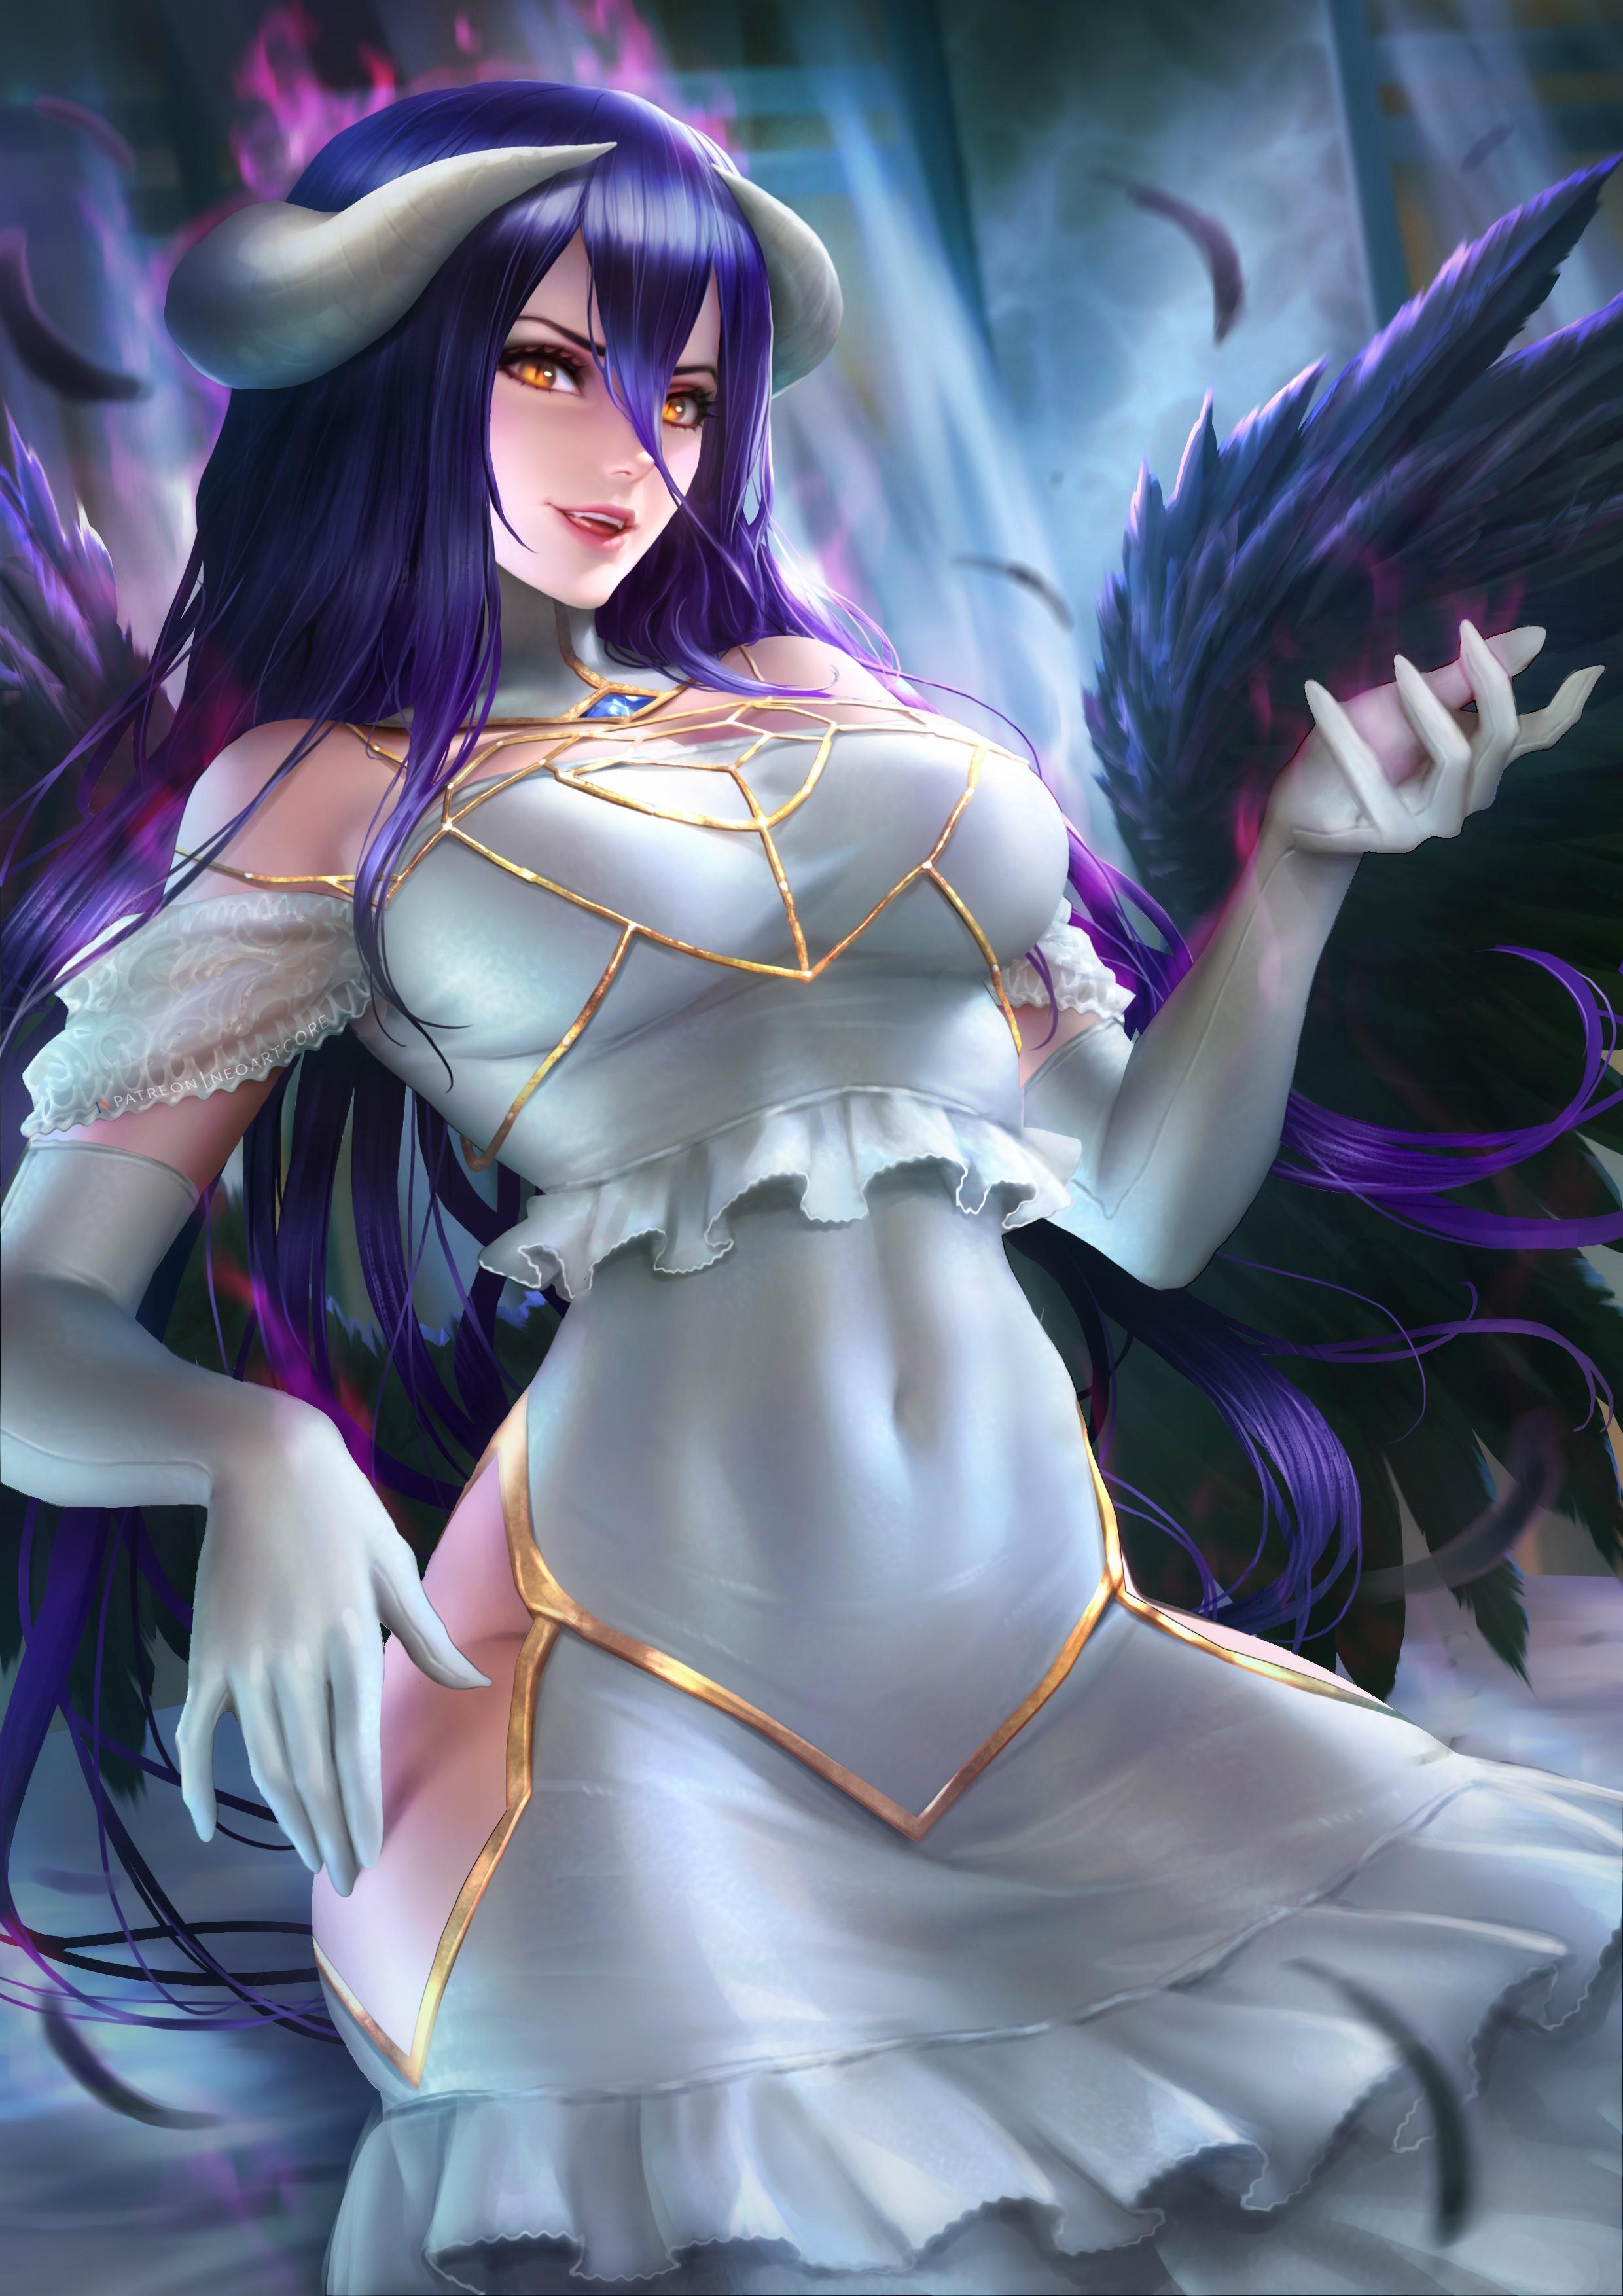 HD wallpaper, Wings, Long Hair, Horns, Succubus, Feathers, Dress, Overlord Anime, Smiling, Fantasy Art, Artwork, Looking At Viewer, Fangs, Elbow Gloves, Neoartcore Artist, Digital Art, Vertical, Albedo Overlord, Drawing, Fantasy Girl, Tight Clothing, Yellow Eyes, Illustration, White Clothing, Fan Art, Dark Hair, Anime, Portrait Display, White Dress, Belly, White Gloves, Anime Girls